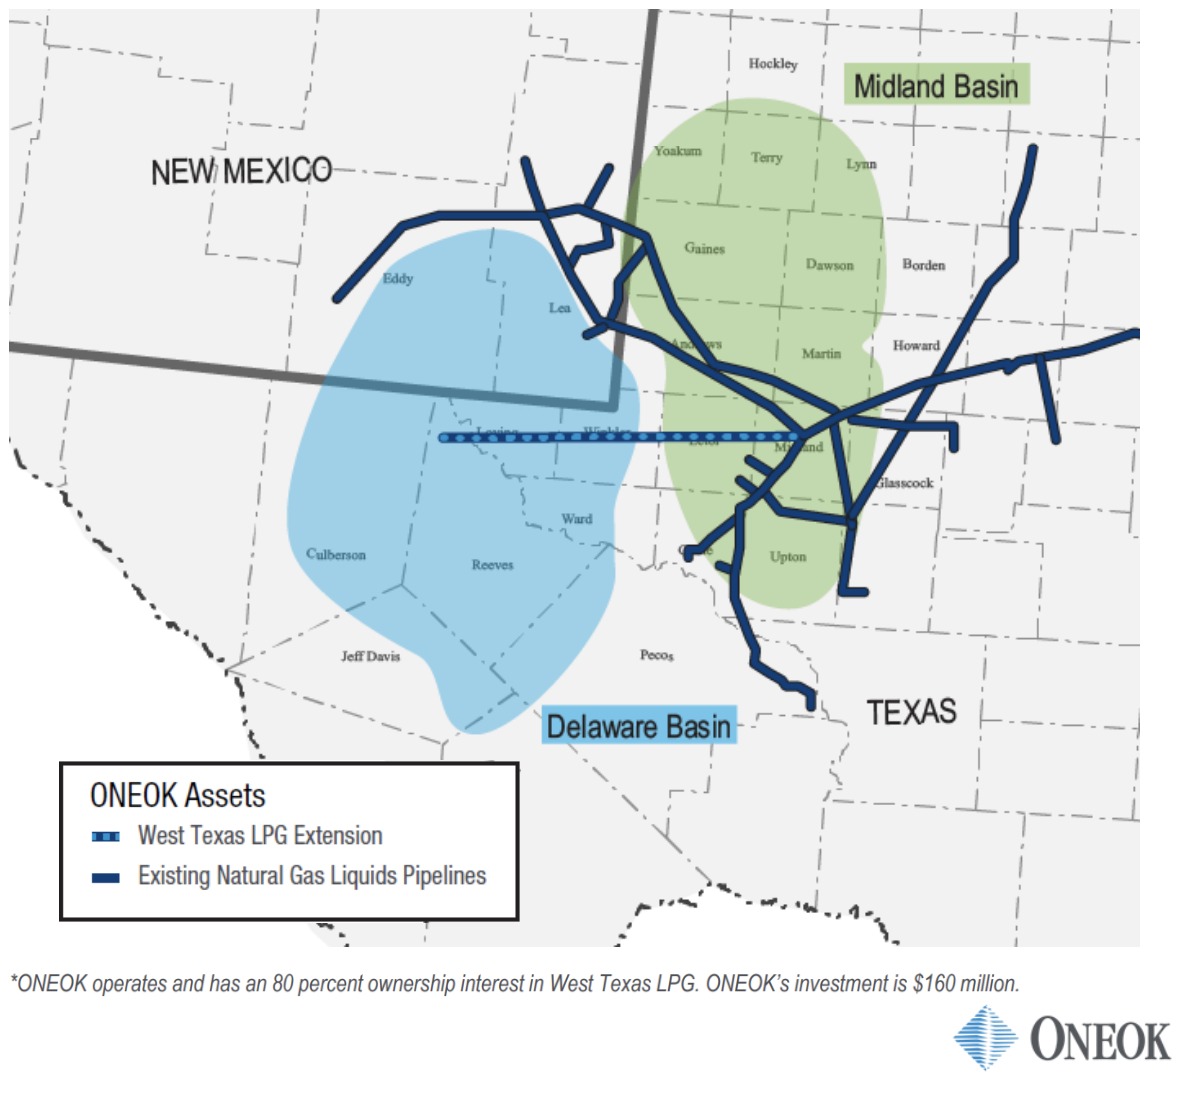 West Texas LPG Expansion (Source: ONEOK Inc.)